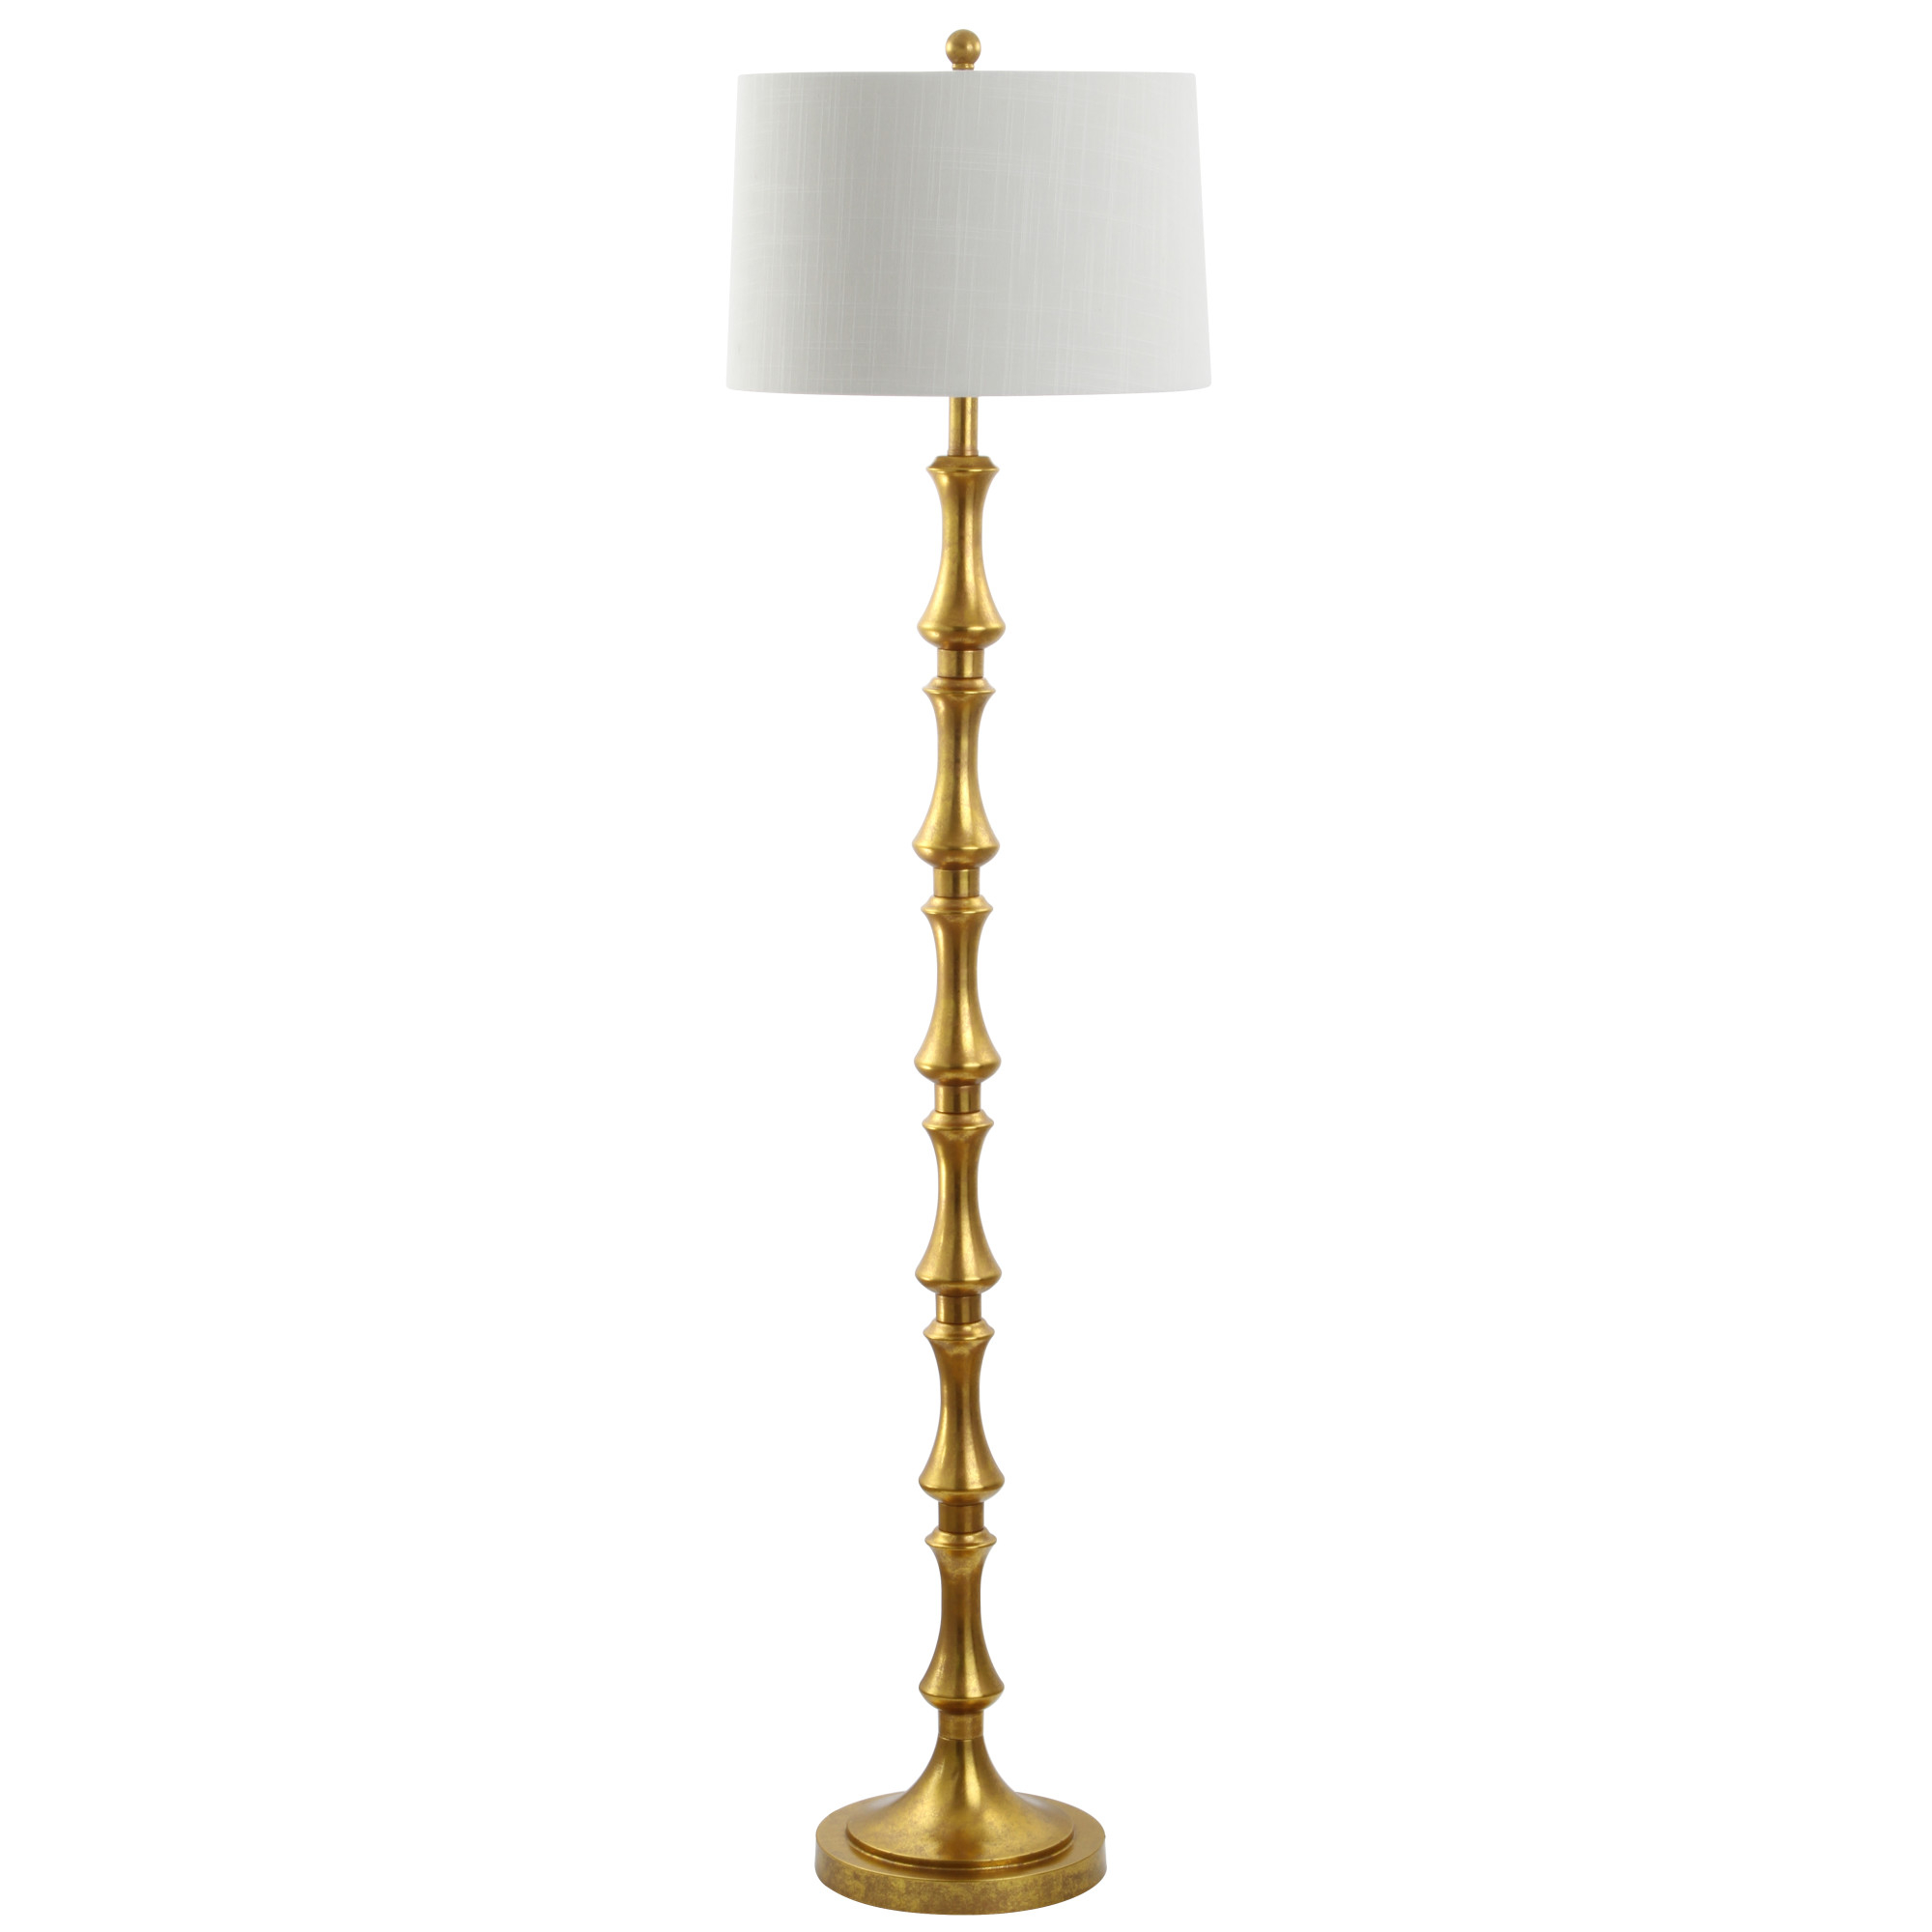 Details About Jonathan Y Lighting Jyl4031 Jaxon Single Light 63 Tall Led Buffet Floor Lamp within sizing 2000 X 2000